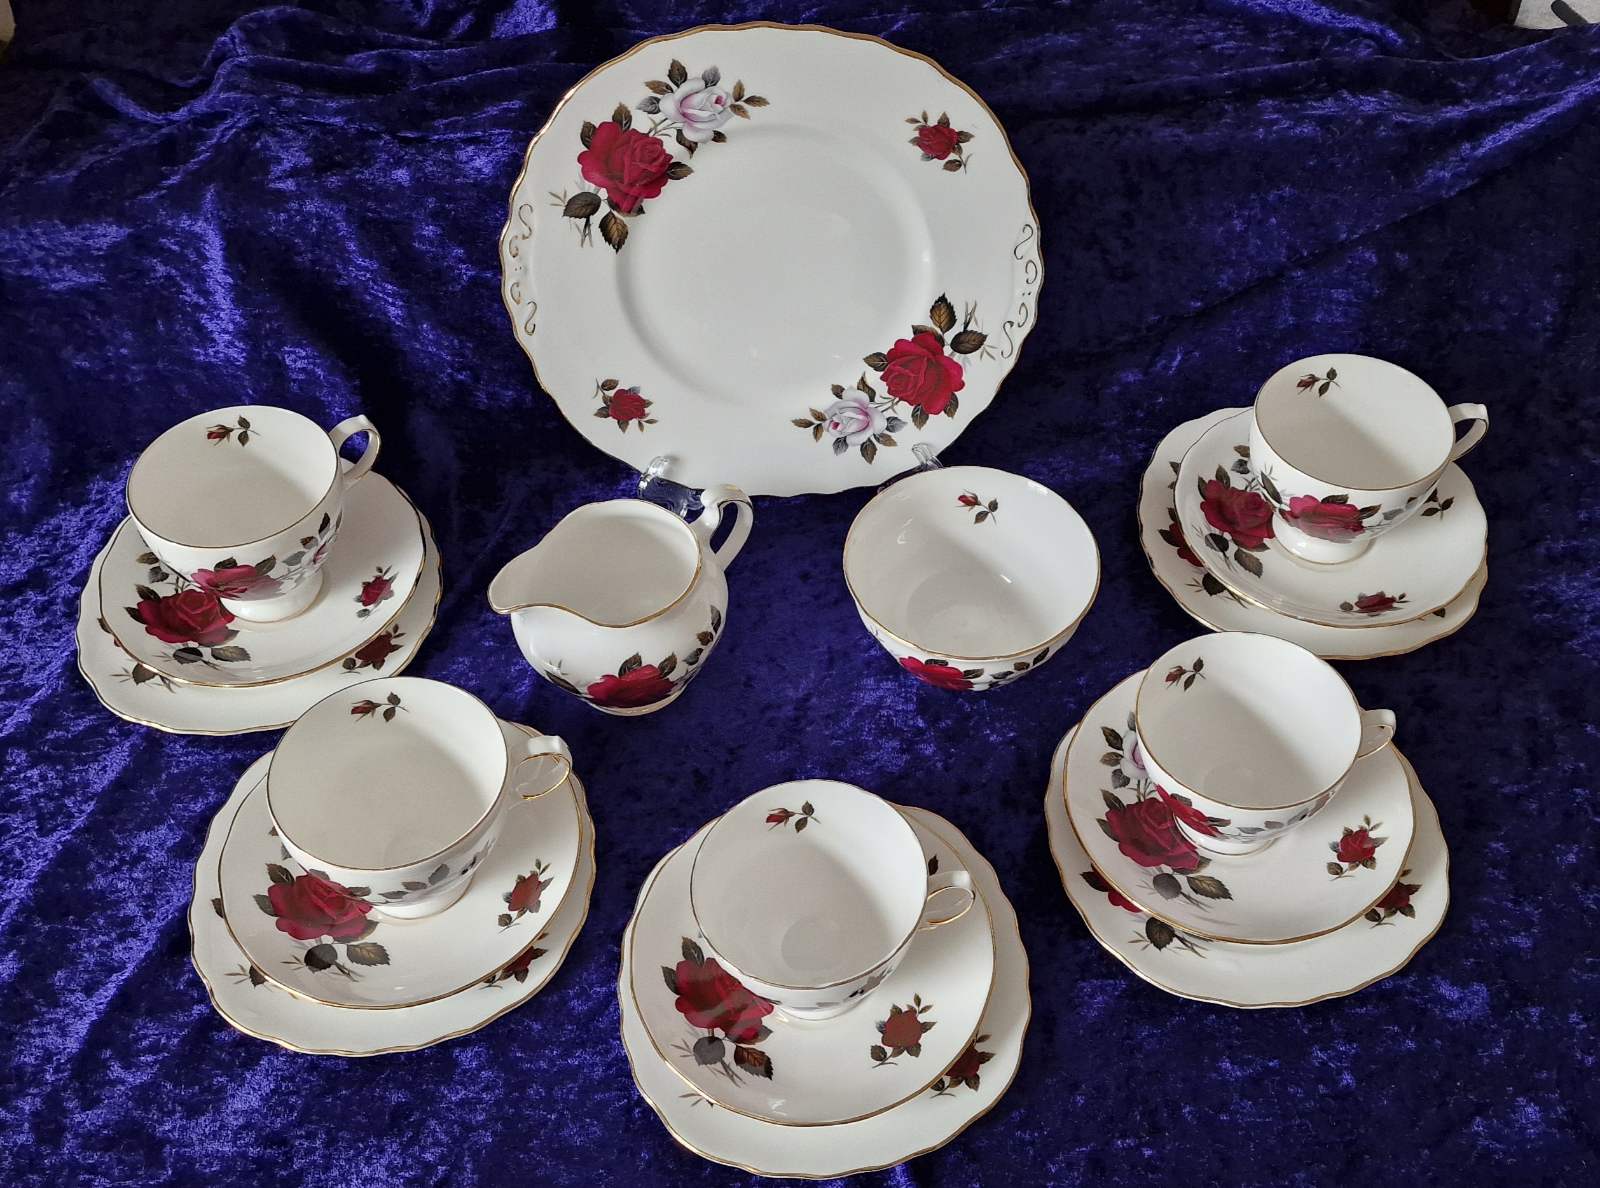 Elegant Colclough "Amoretta Rose" 18-piece tea set with china cups and saucers decorated with roses.